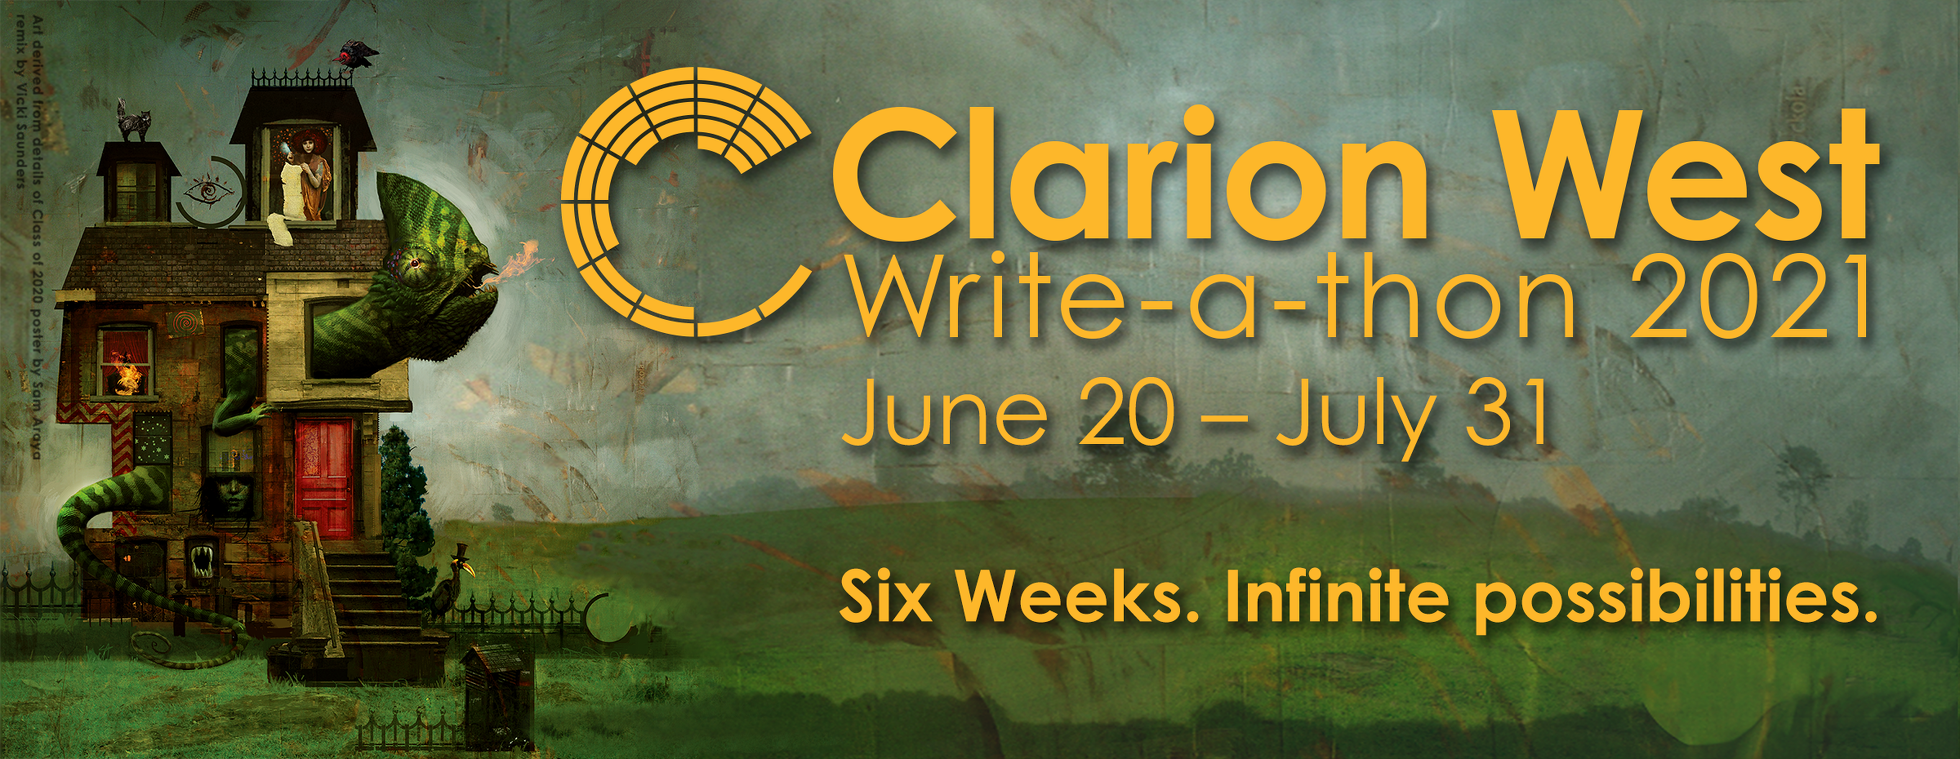 Clarion West Write-a-thon 2021